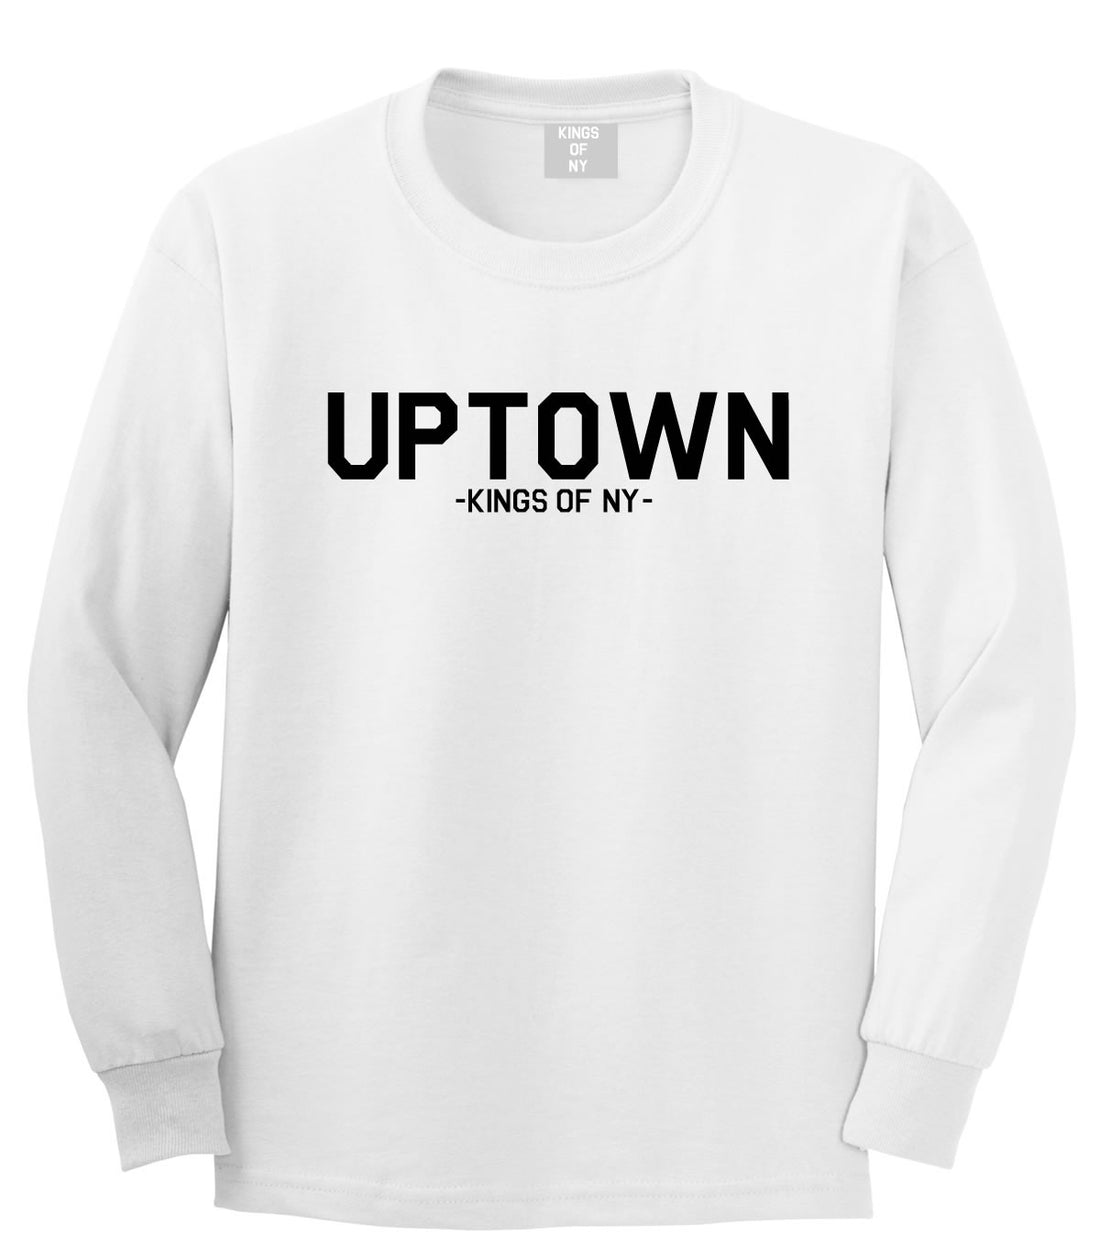 UPTOWN nyc New York Long Sleeve T-Shirt in White